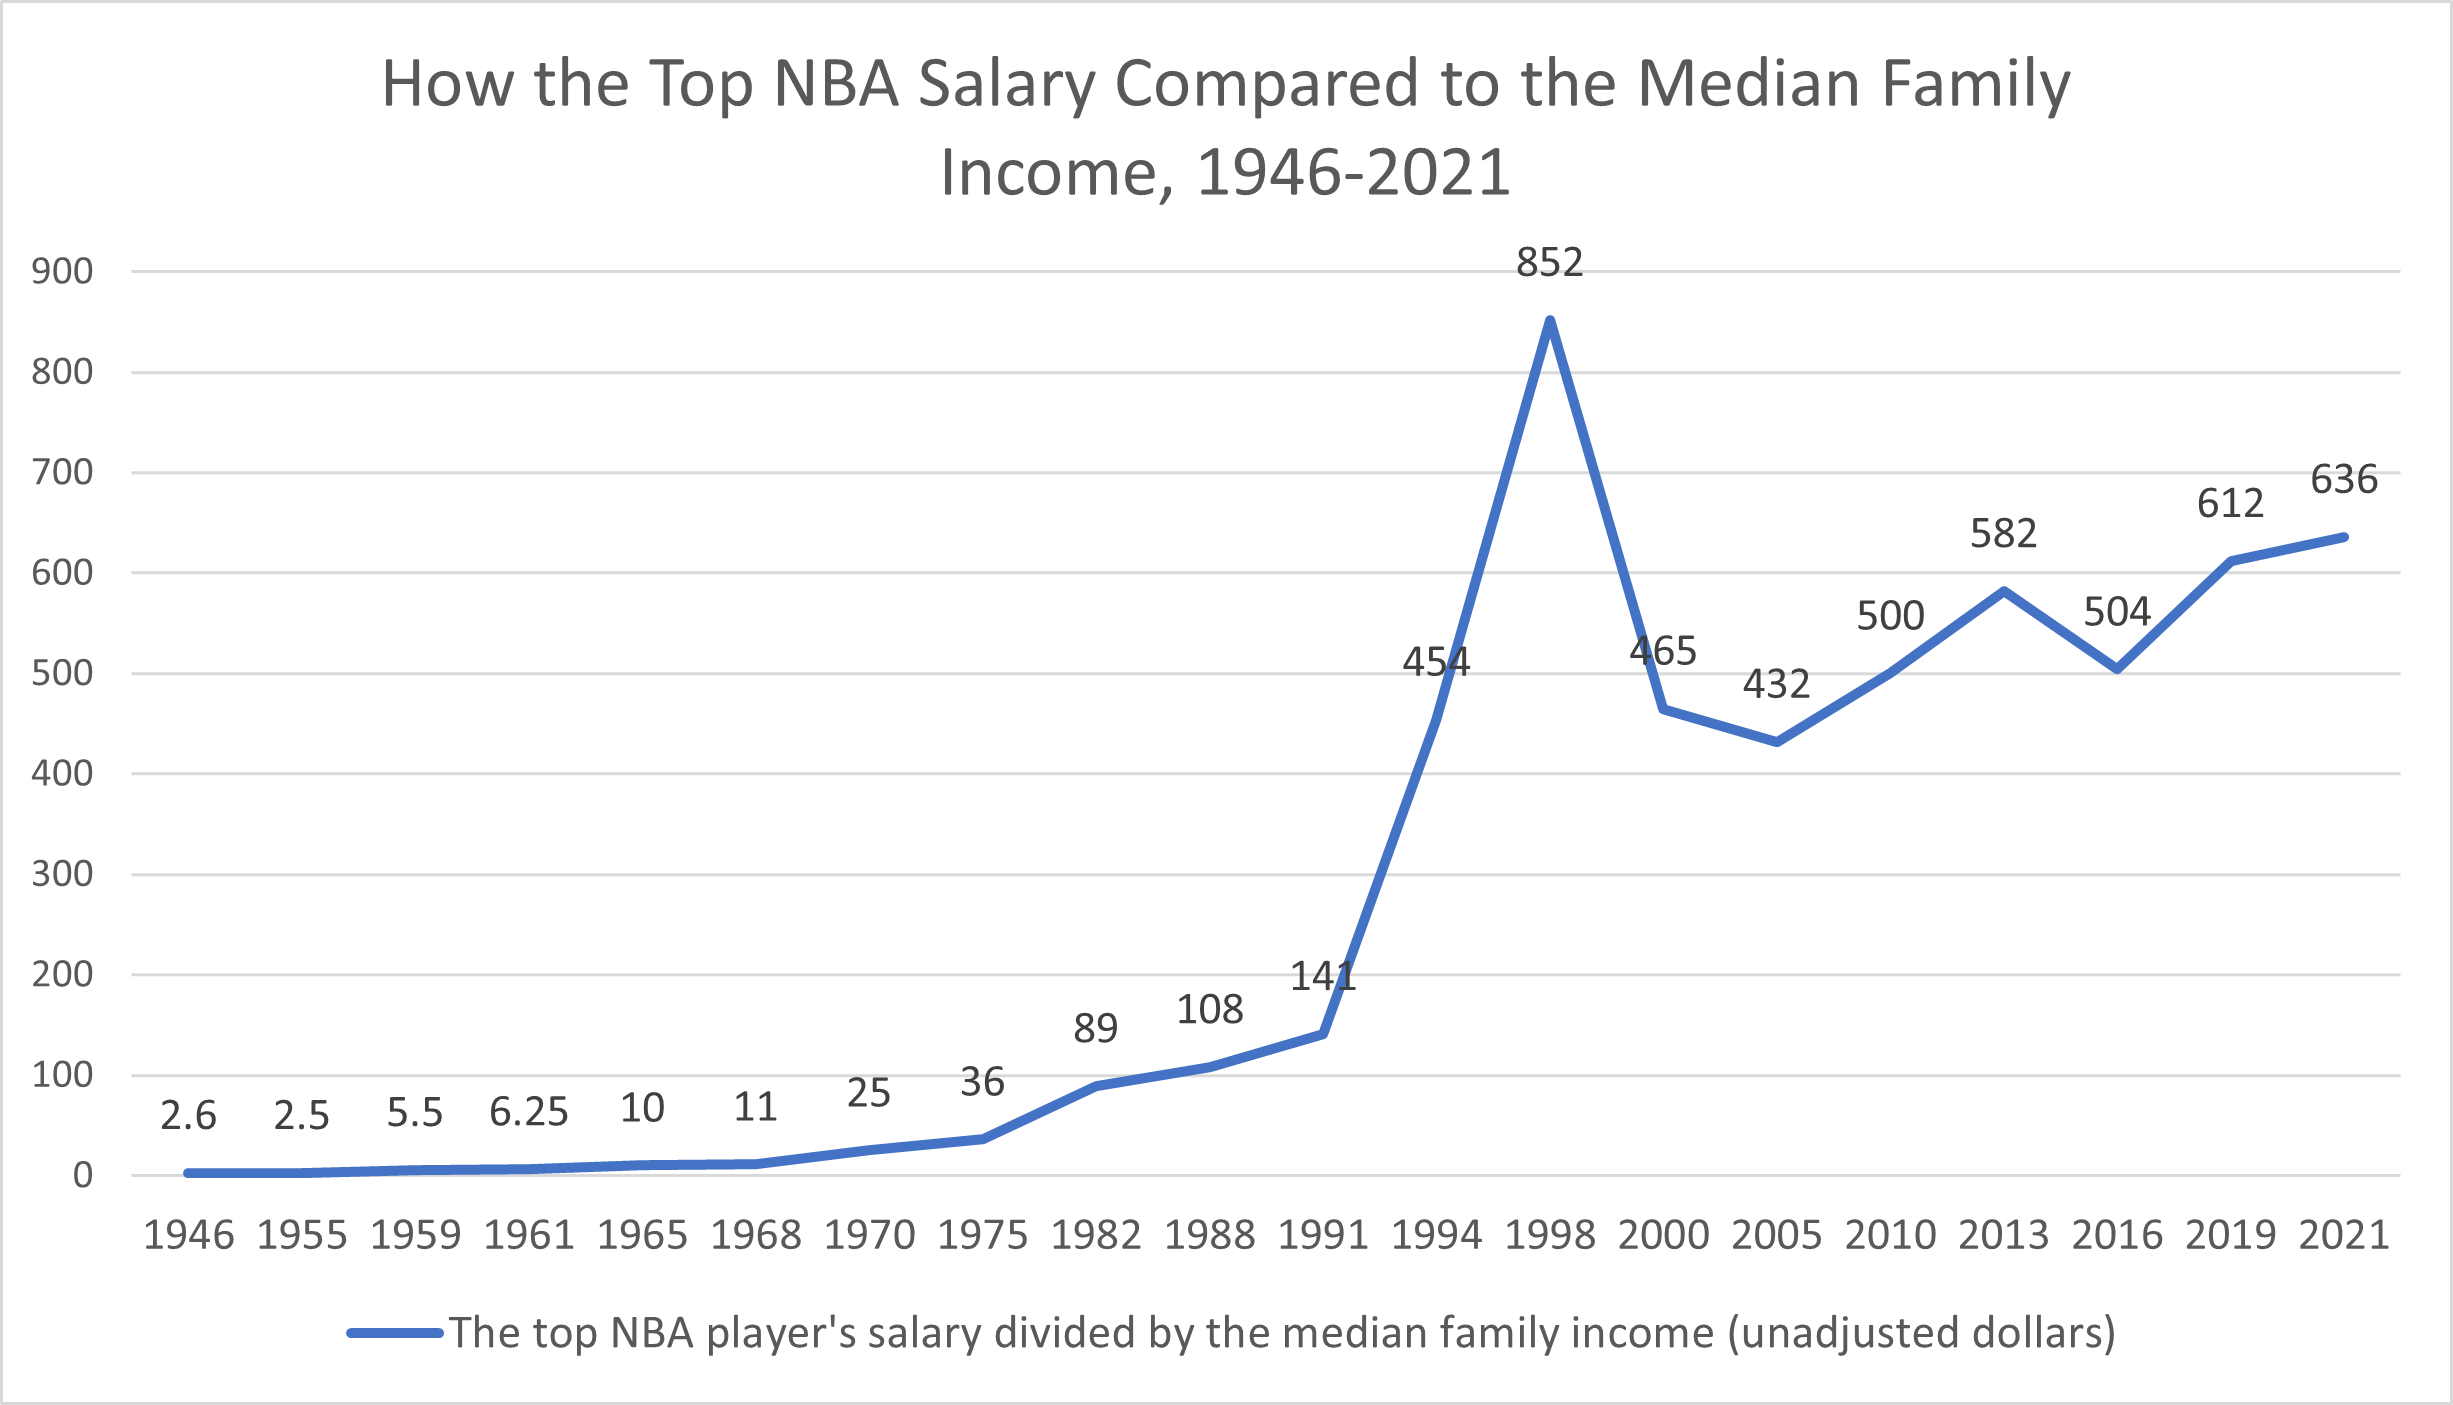 Top MBA salaries compared to median family income